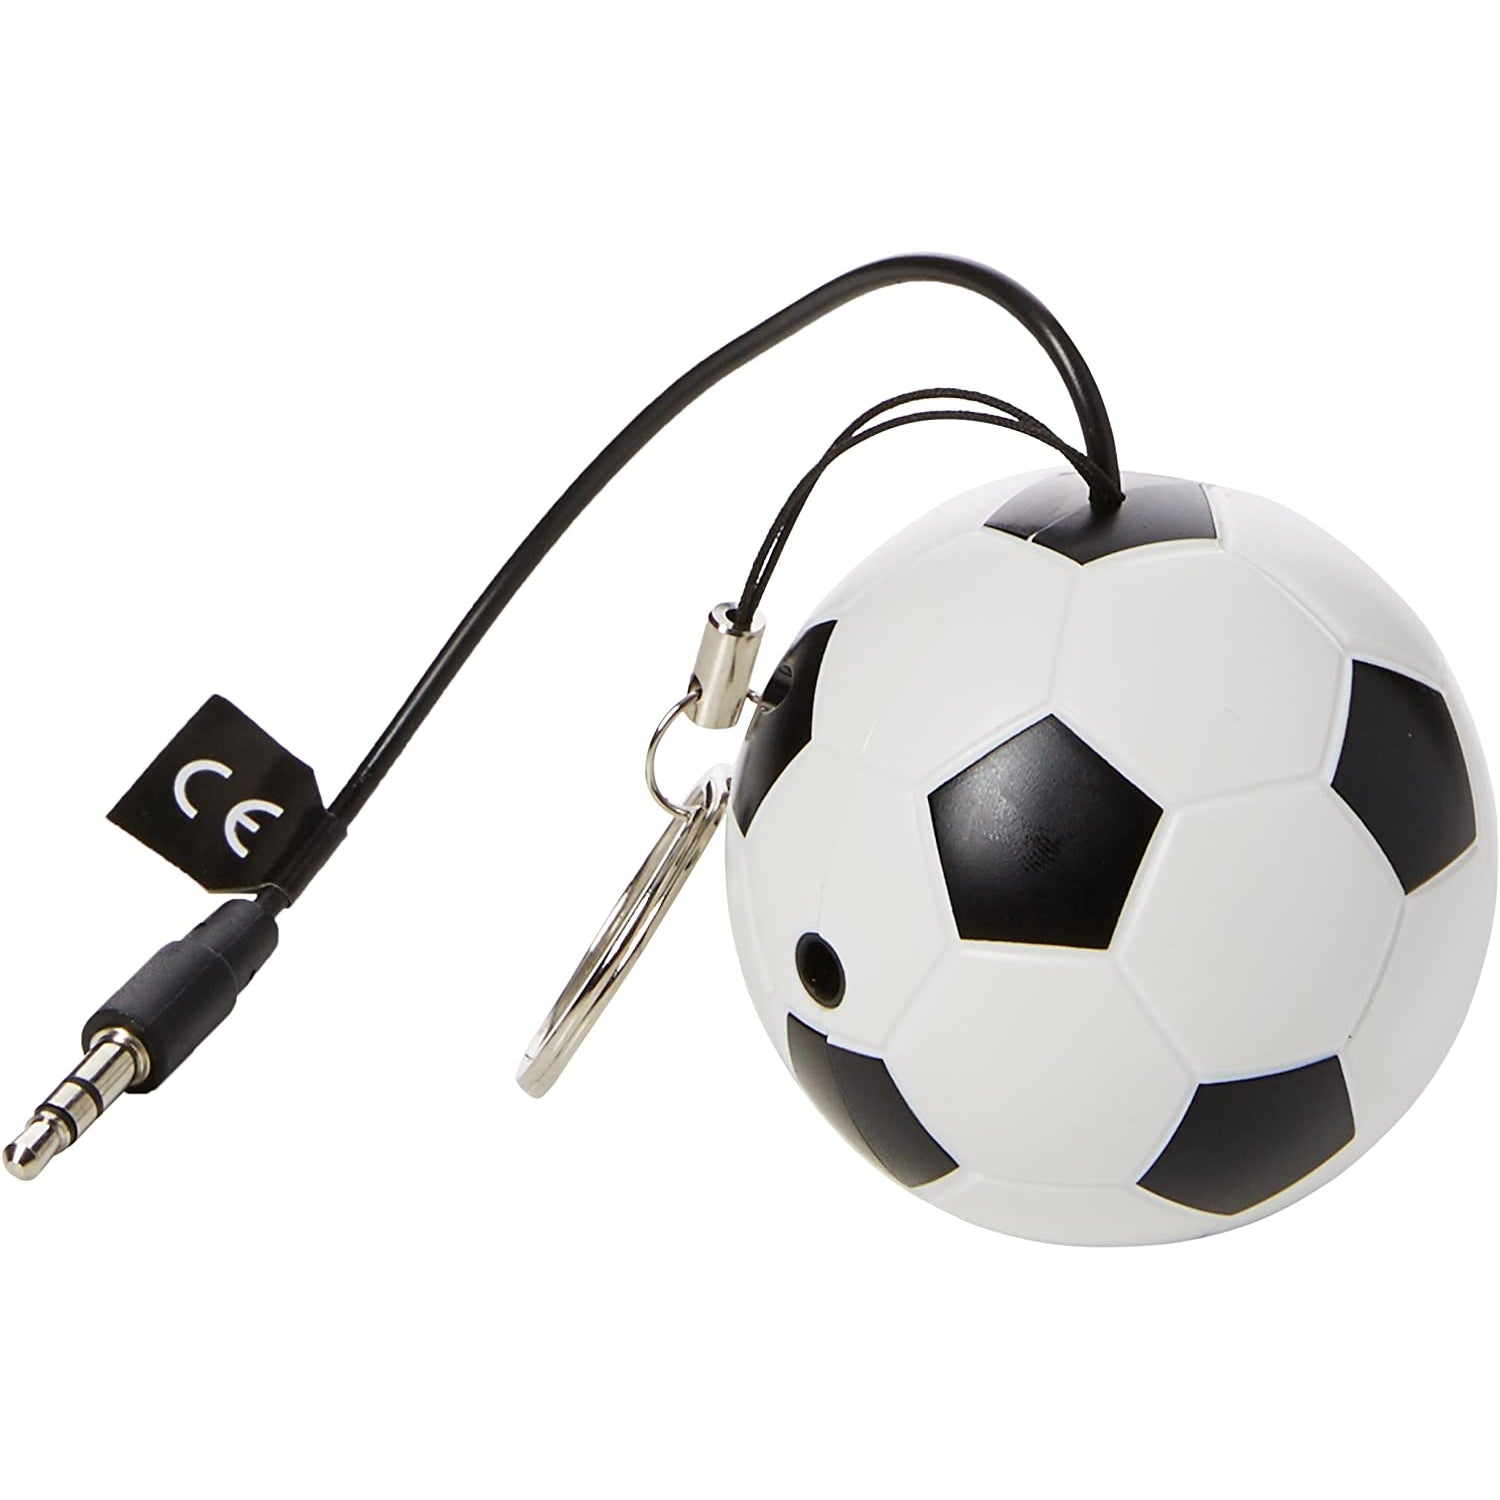 KitSound Football Mini Buddy and Portable Rechargeable Universal Wired Speaker